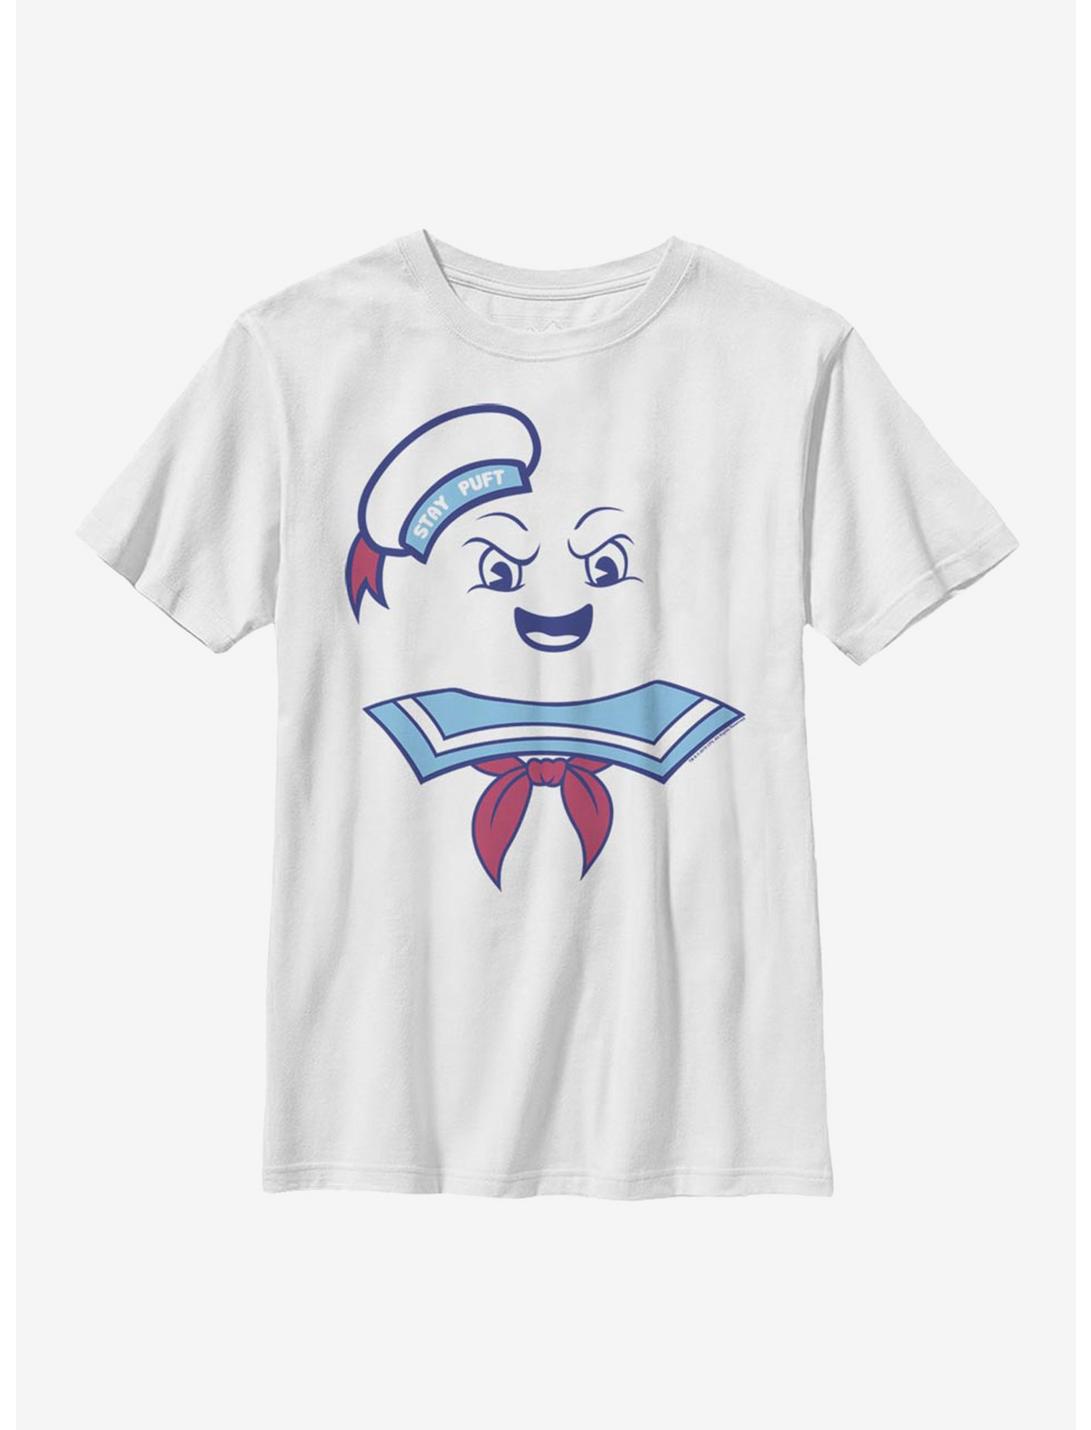 Ghostbusters Puff Face Costume Youth T-Shirt, WHITE, hi-res